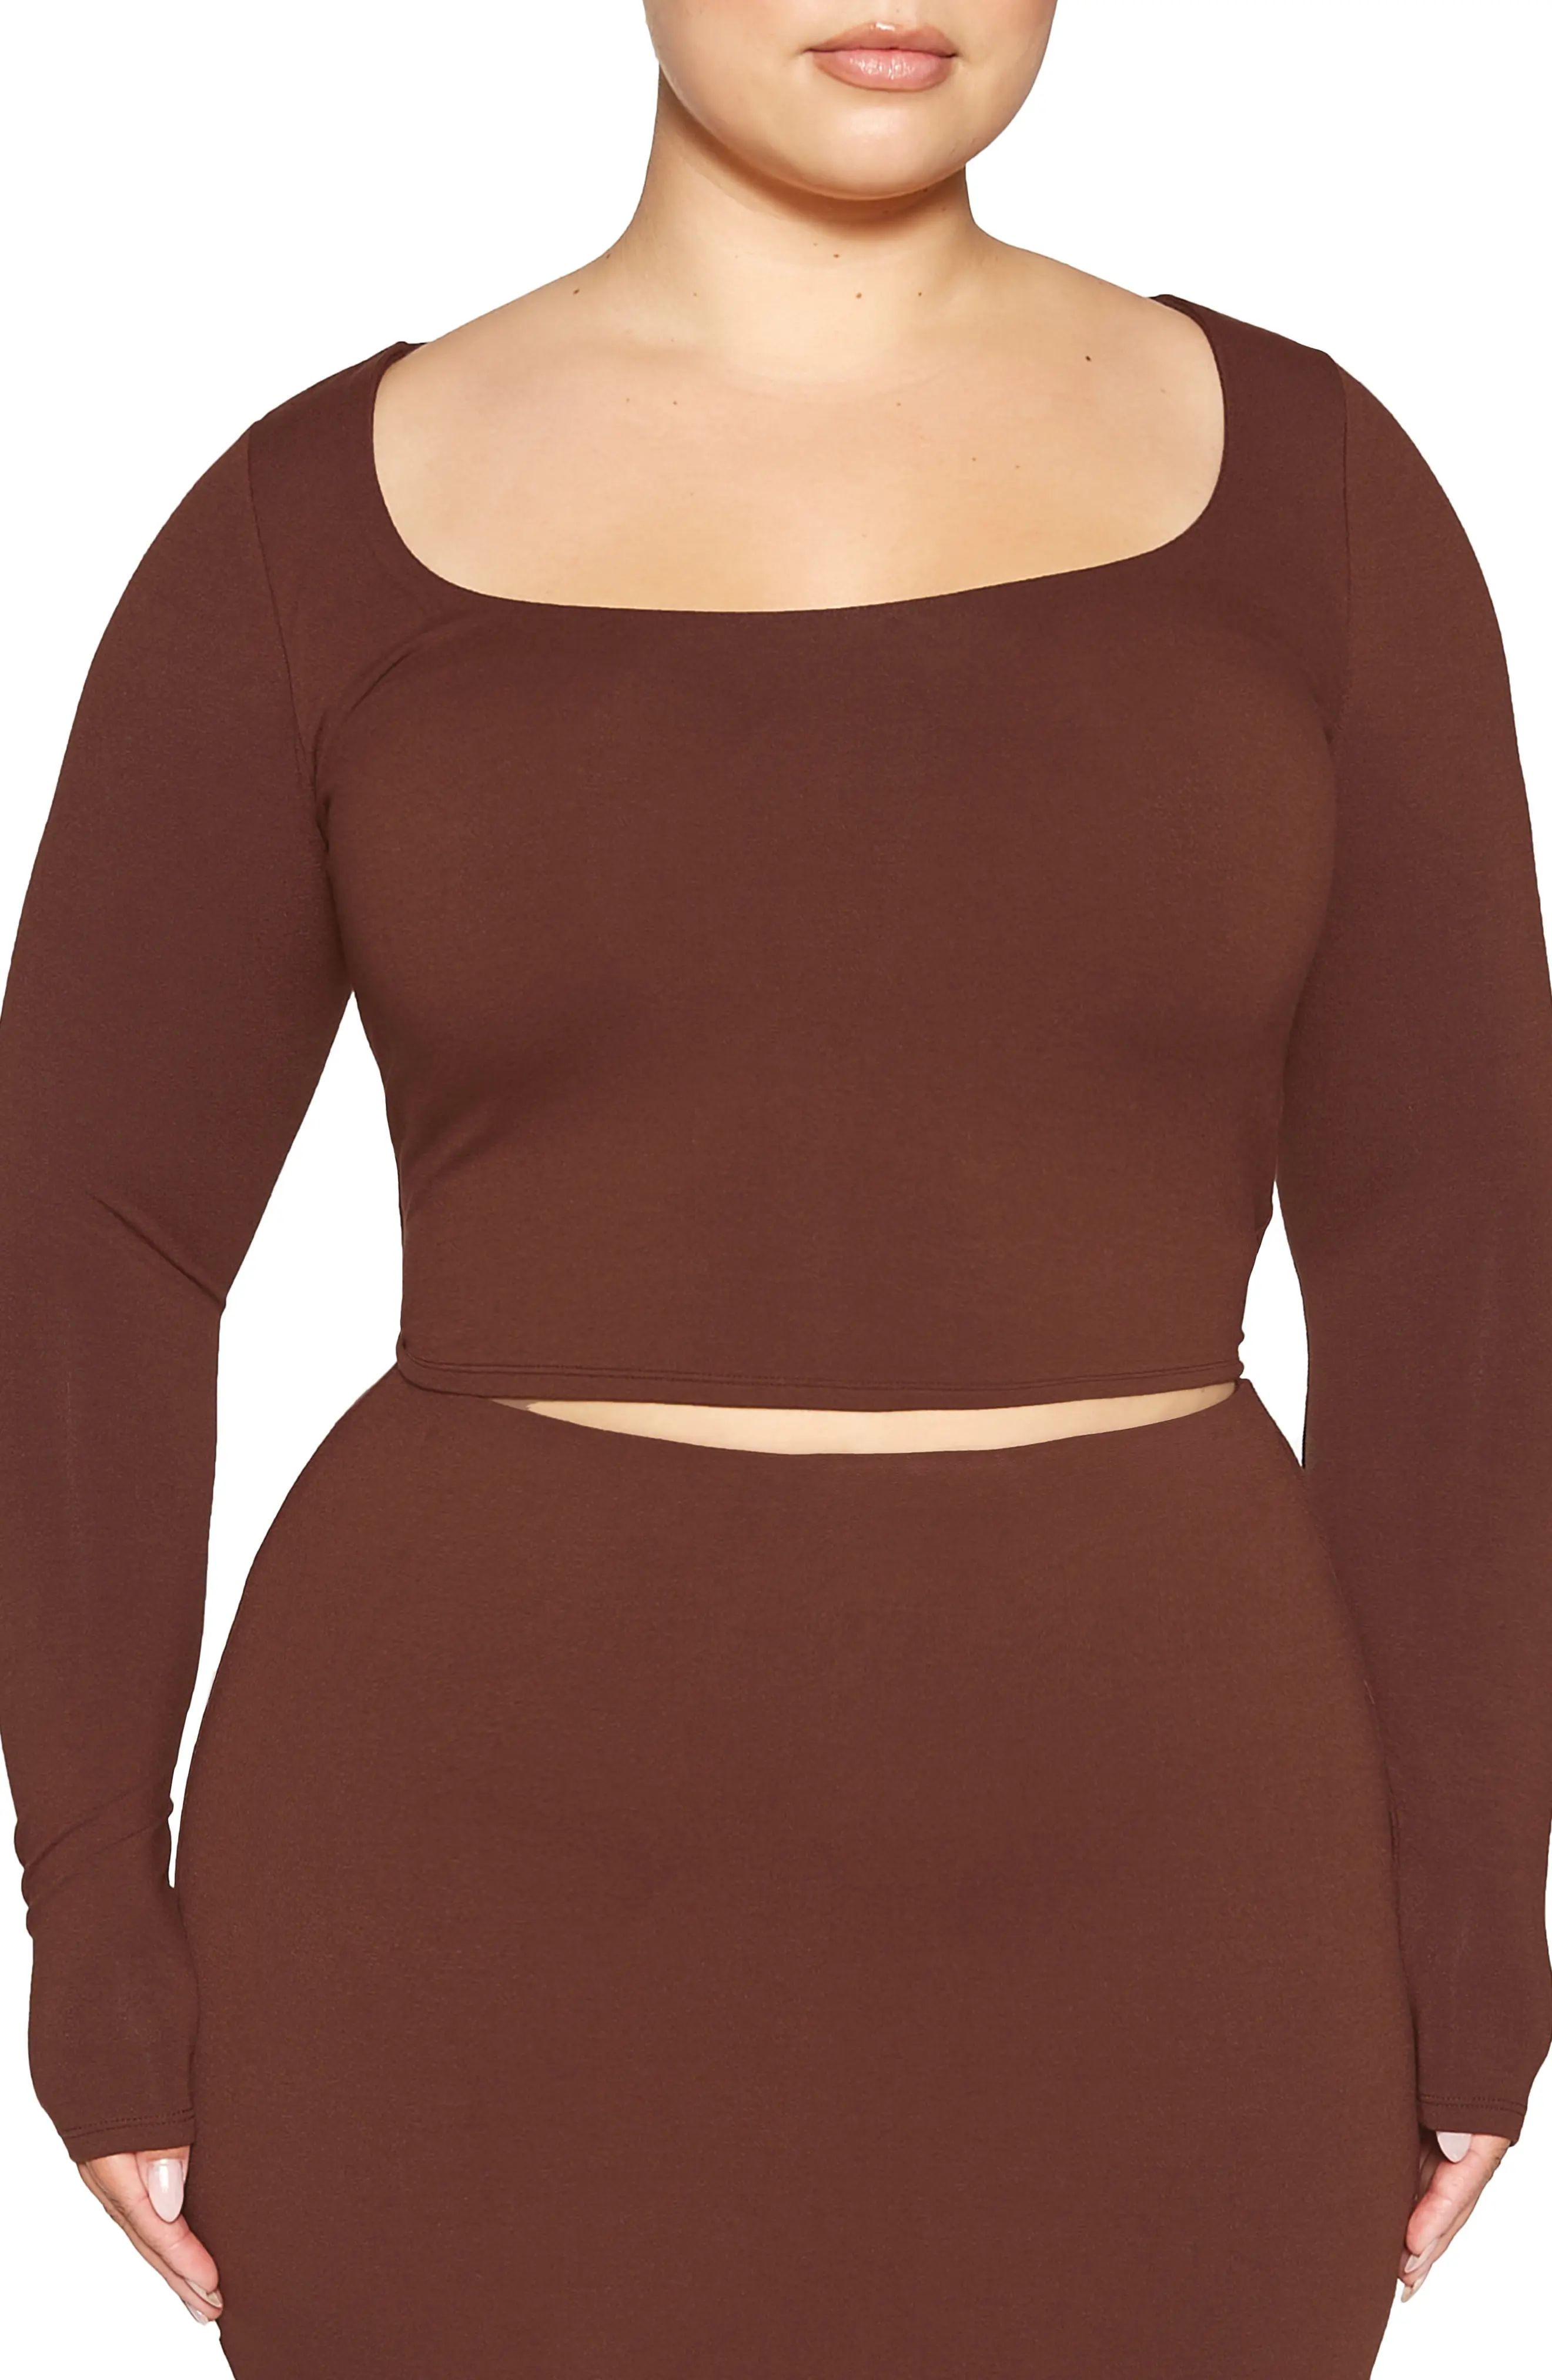 Plus Size Women's Naked Wardrobe Square Neck Crop Top, Size 3X - Brown | Nordstrom